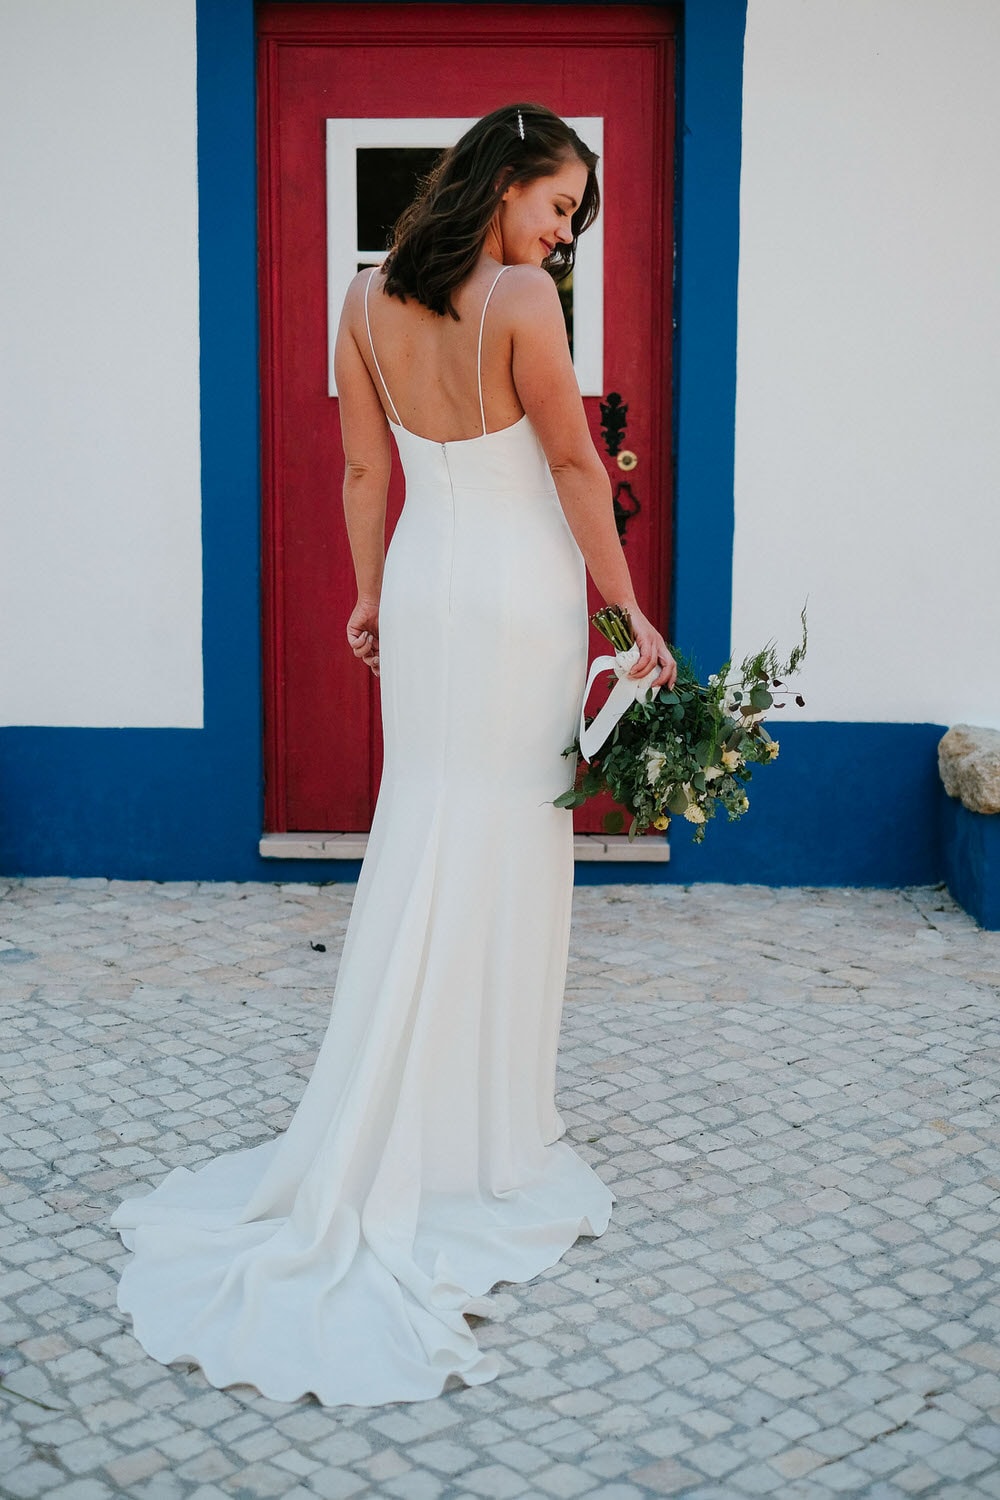 The bride without veil showcases the back of her dress and train while holding her bouquet in front of the door with a blue boat, a traditional Portuguese feature at Quinta da Bichinha